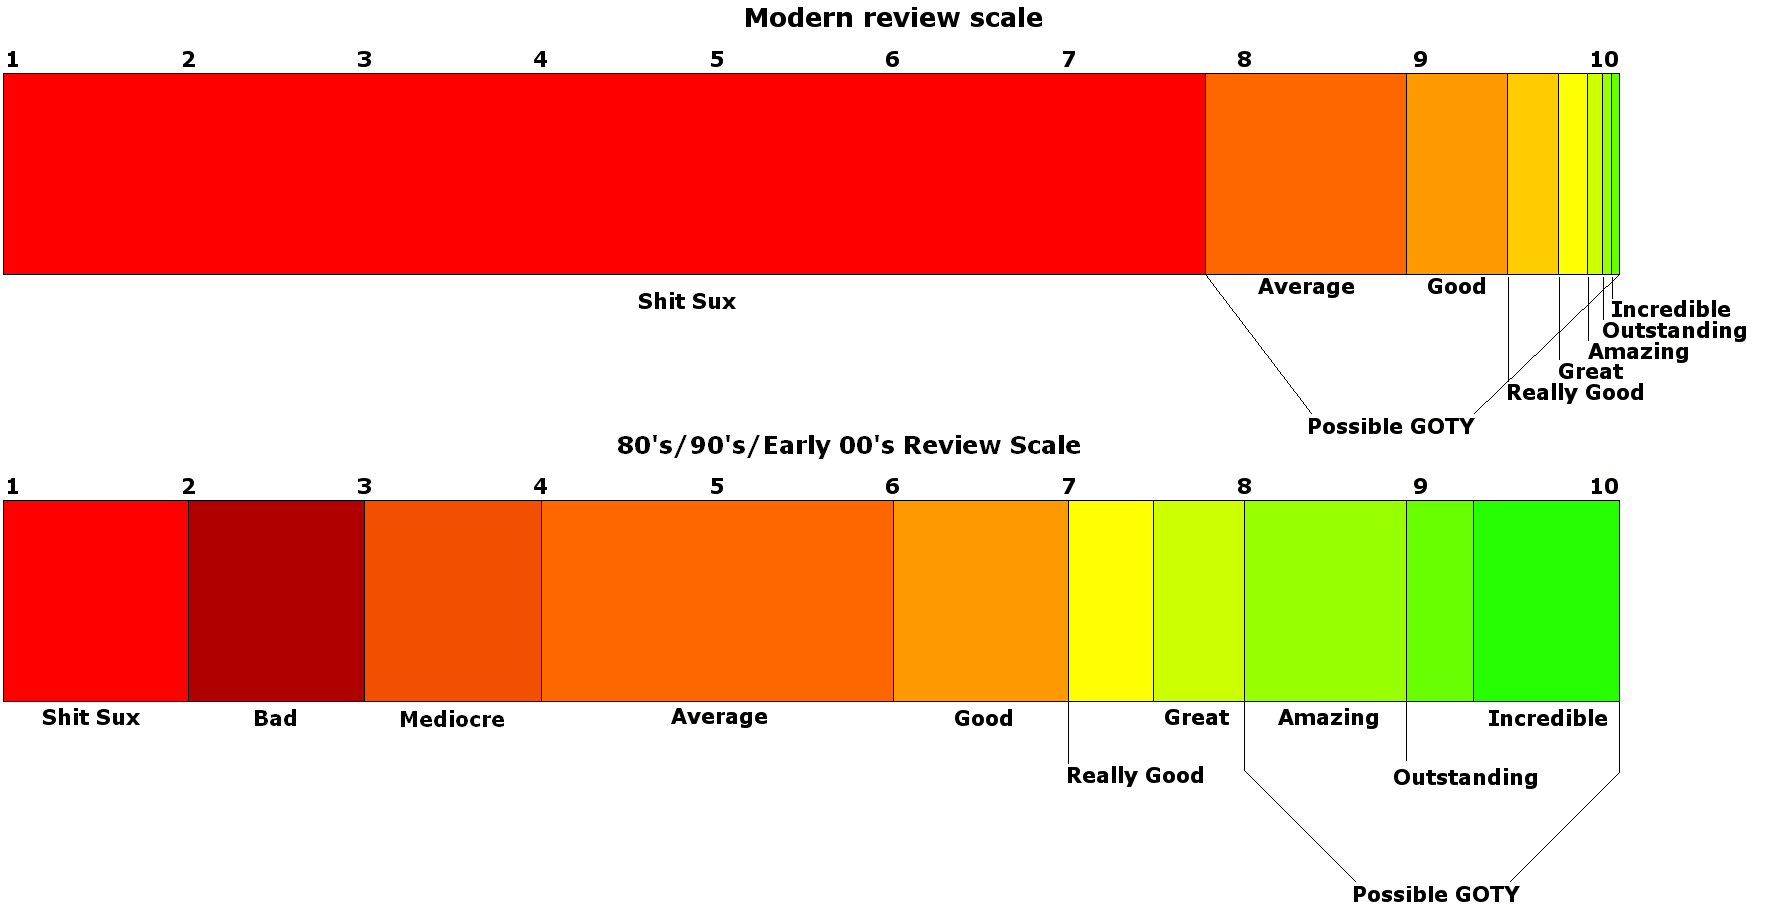 Modern review scale